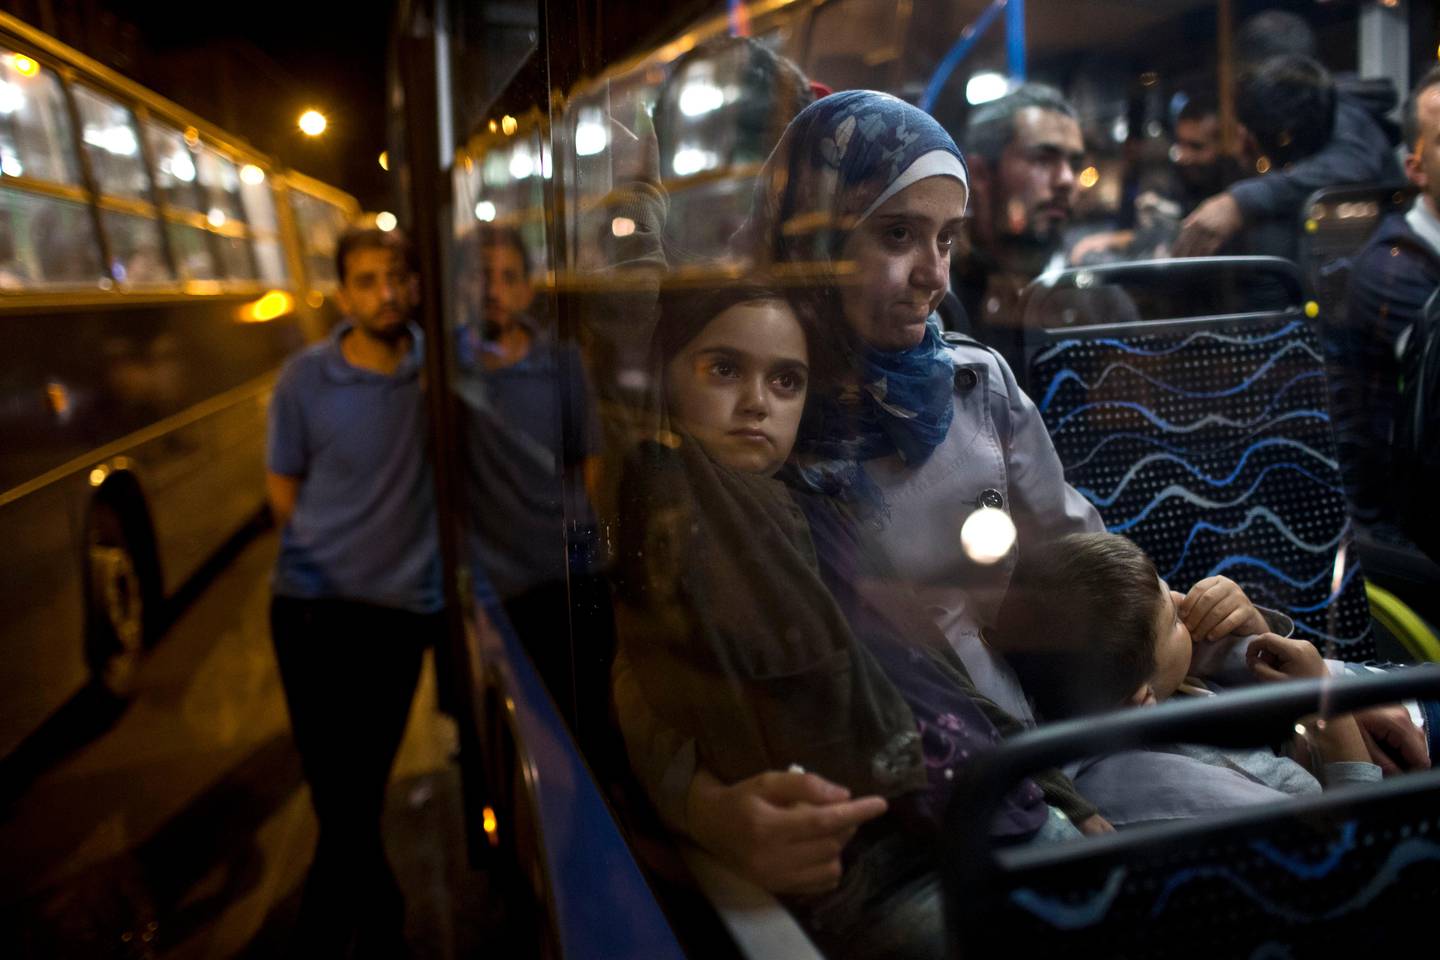 A woman and her children sit as they have boarded a bus provided by Hungarian authorities for migrants and refugees at Keleti train station in Budapest, Hungary, Saturday, Sept. 5, 2015. Hundreds of migrants boarded buses provided by Hungary's government as Austria in the early-morning hours said it and Germany would let them in. Austrian Chancellor Werner Faymann announced the decision early Saturday after speaking with Angela Merkel, his German counterpart - not long after Hungary's surprise nighttime move to provide buses for the weary travelers from Syria, Iraq and Afghanistan.  (AP Photo/Marko Drobnjakovic)